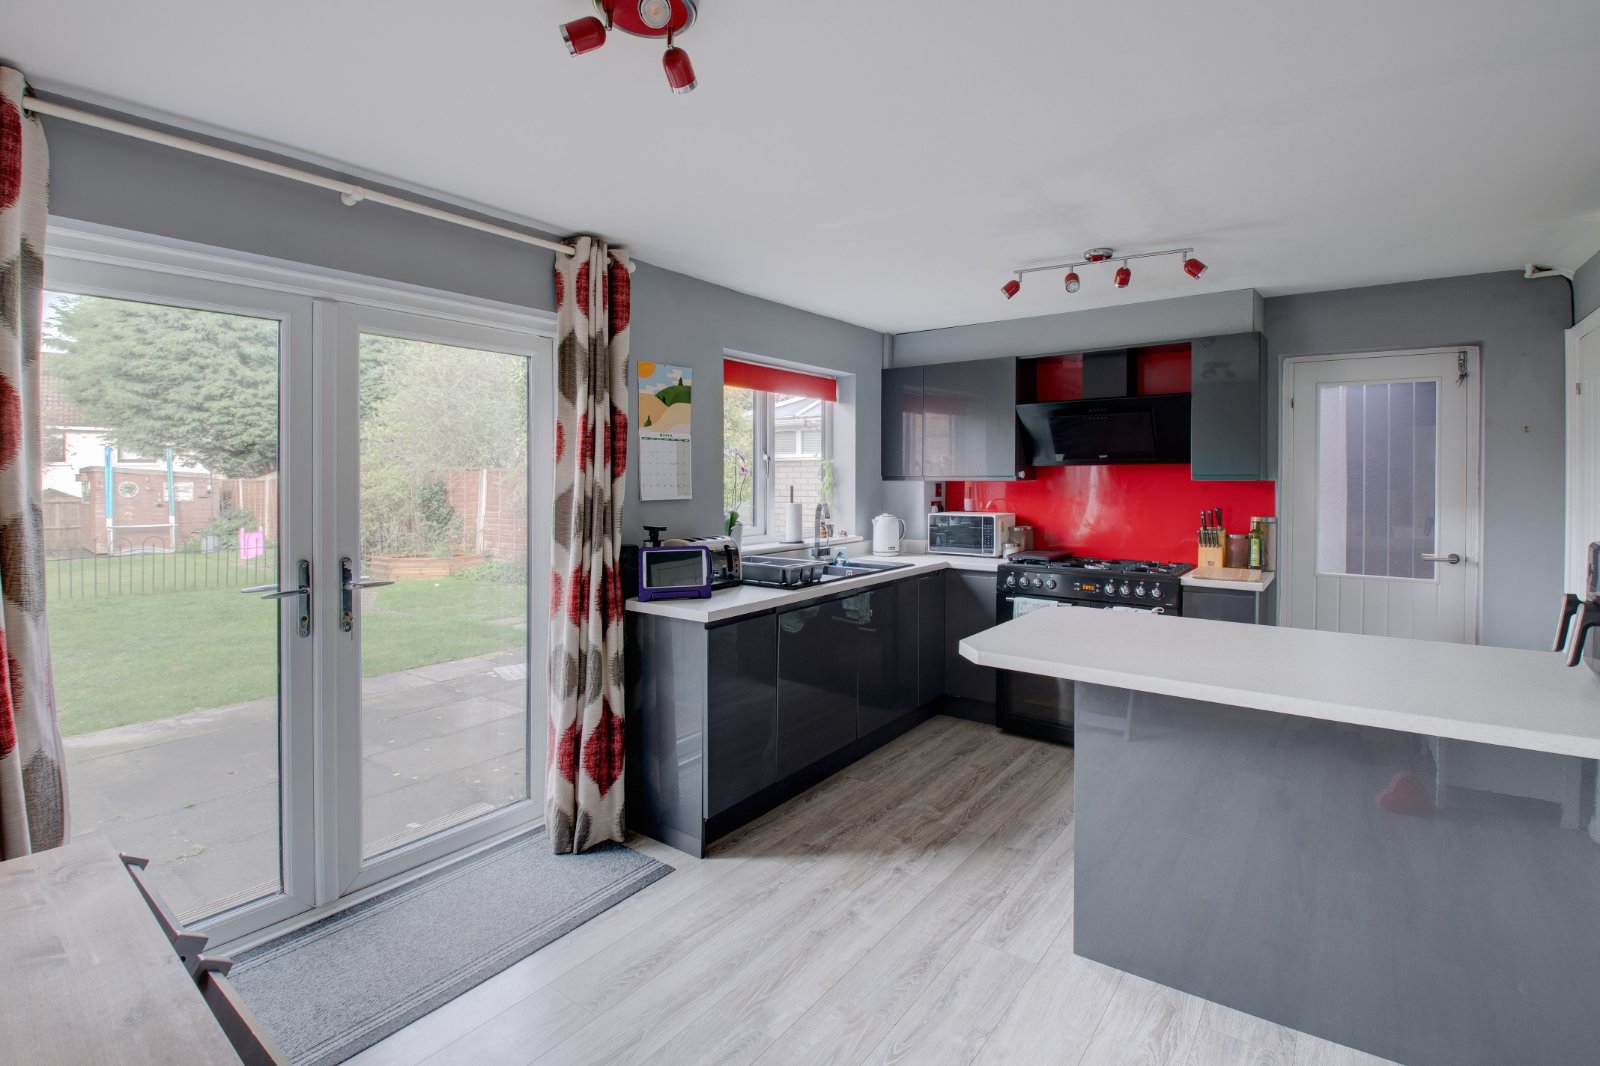 3 bed house for sale in Wildmoor Lane, Catshill 2